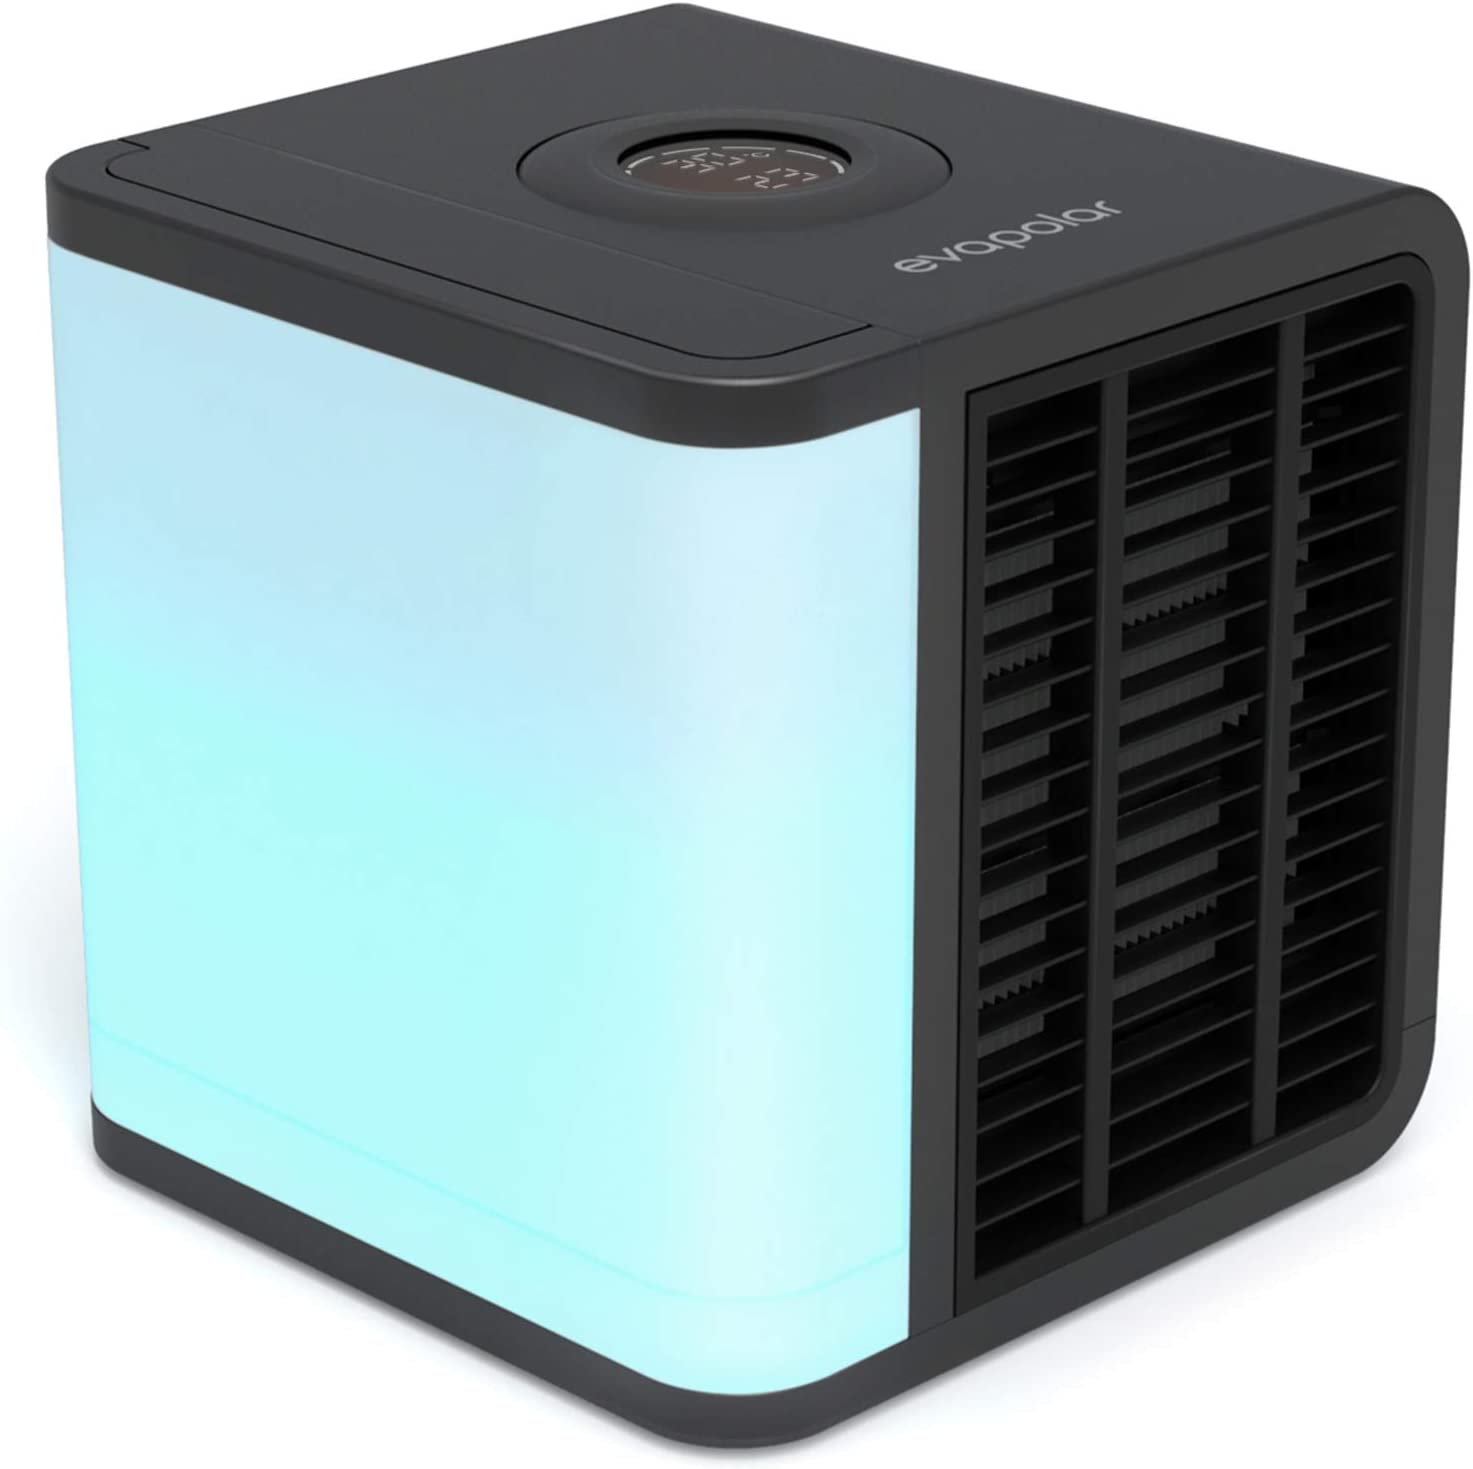 Evapolar evaLIGHT Plus Personal Portable Air Cooler and Humidifier, Desktop Cooling Fan, for Home and Office, with USB Connectivity and Colorful Built-in LED Light, Black (EV-1500) - SILBERSHELL